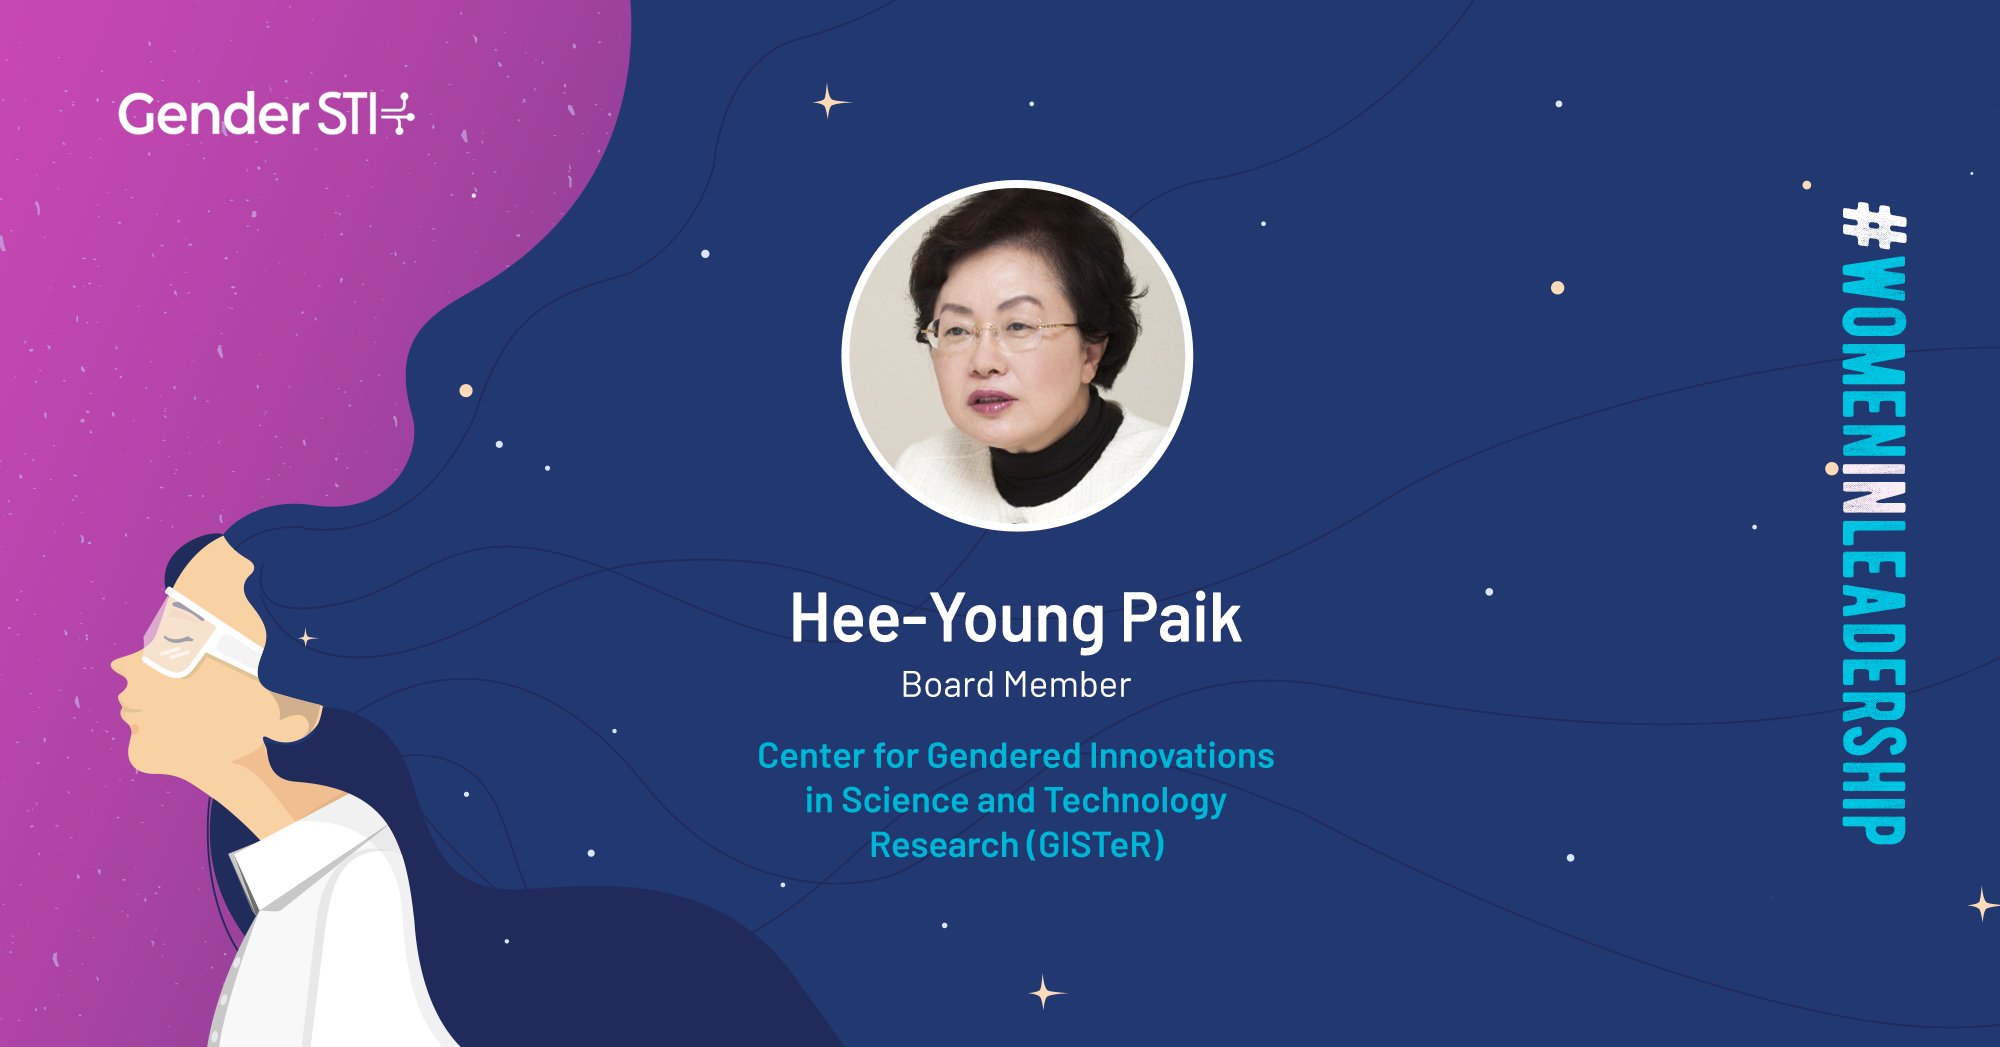 Hee-Young Paik, board member of GISTeR in South Korea, is a nominee for Gender STI's #WomenInLeadership campaign.